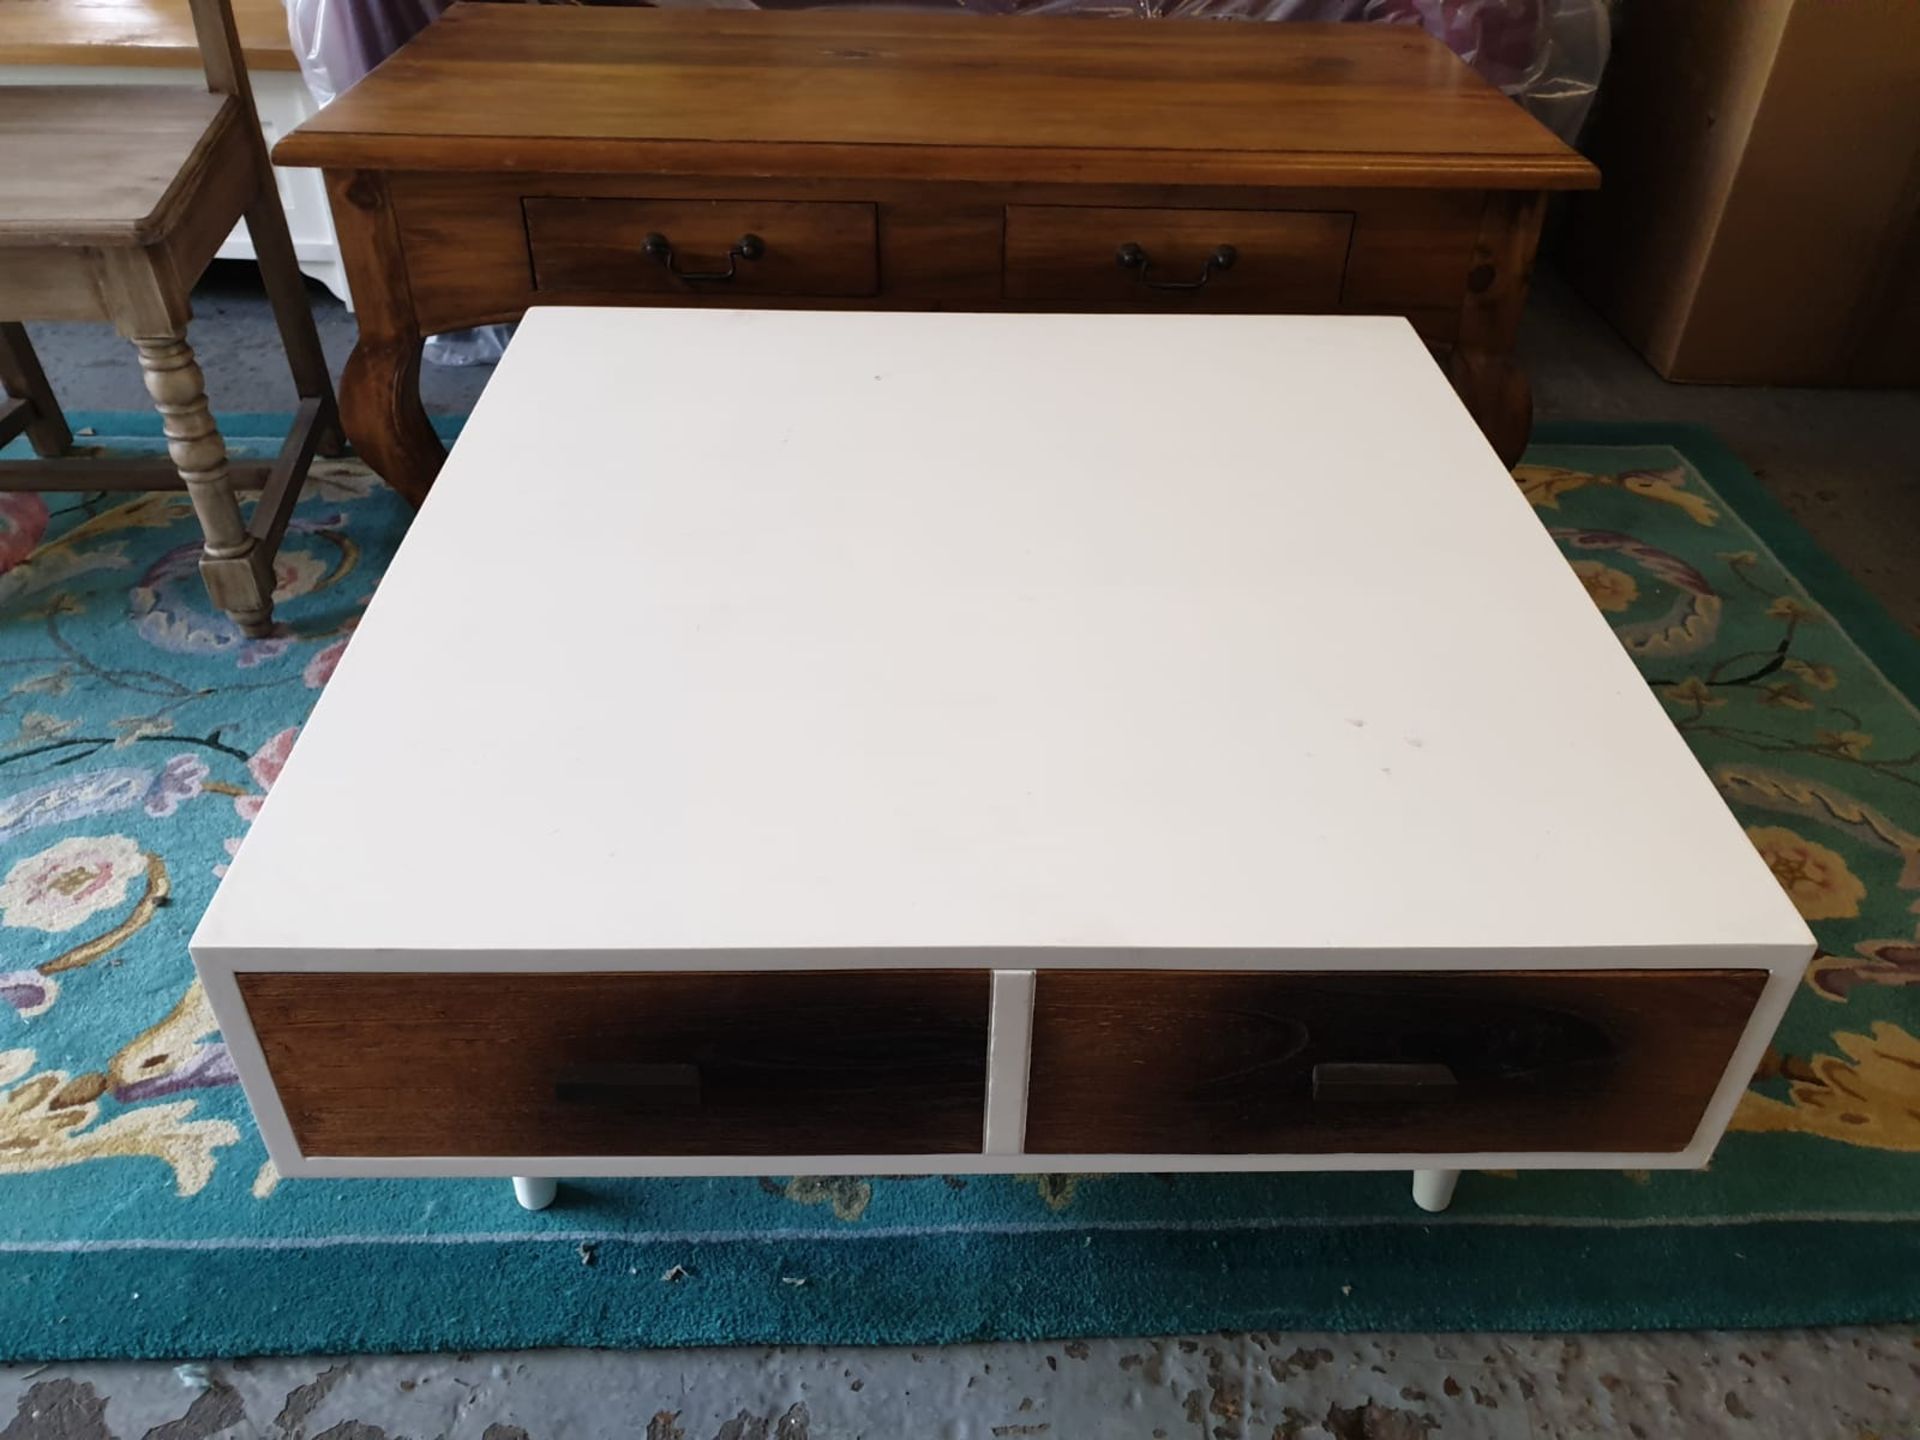 Vanilla Retro Square Coffee Table Walnut Veneer Front Panel And Gloss White 2 Drawers The Clean - Image 2 of 2